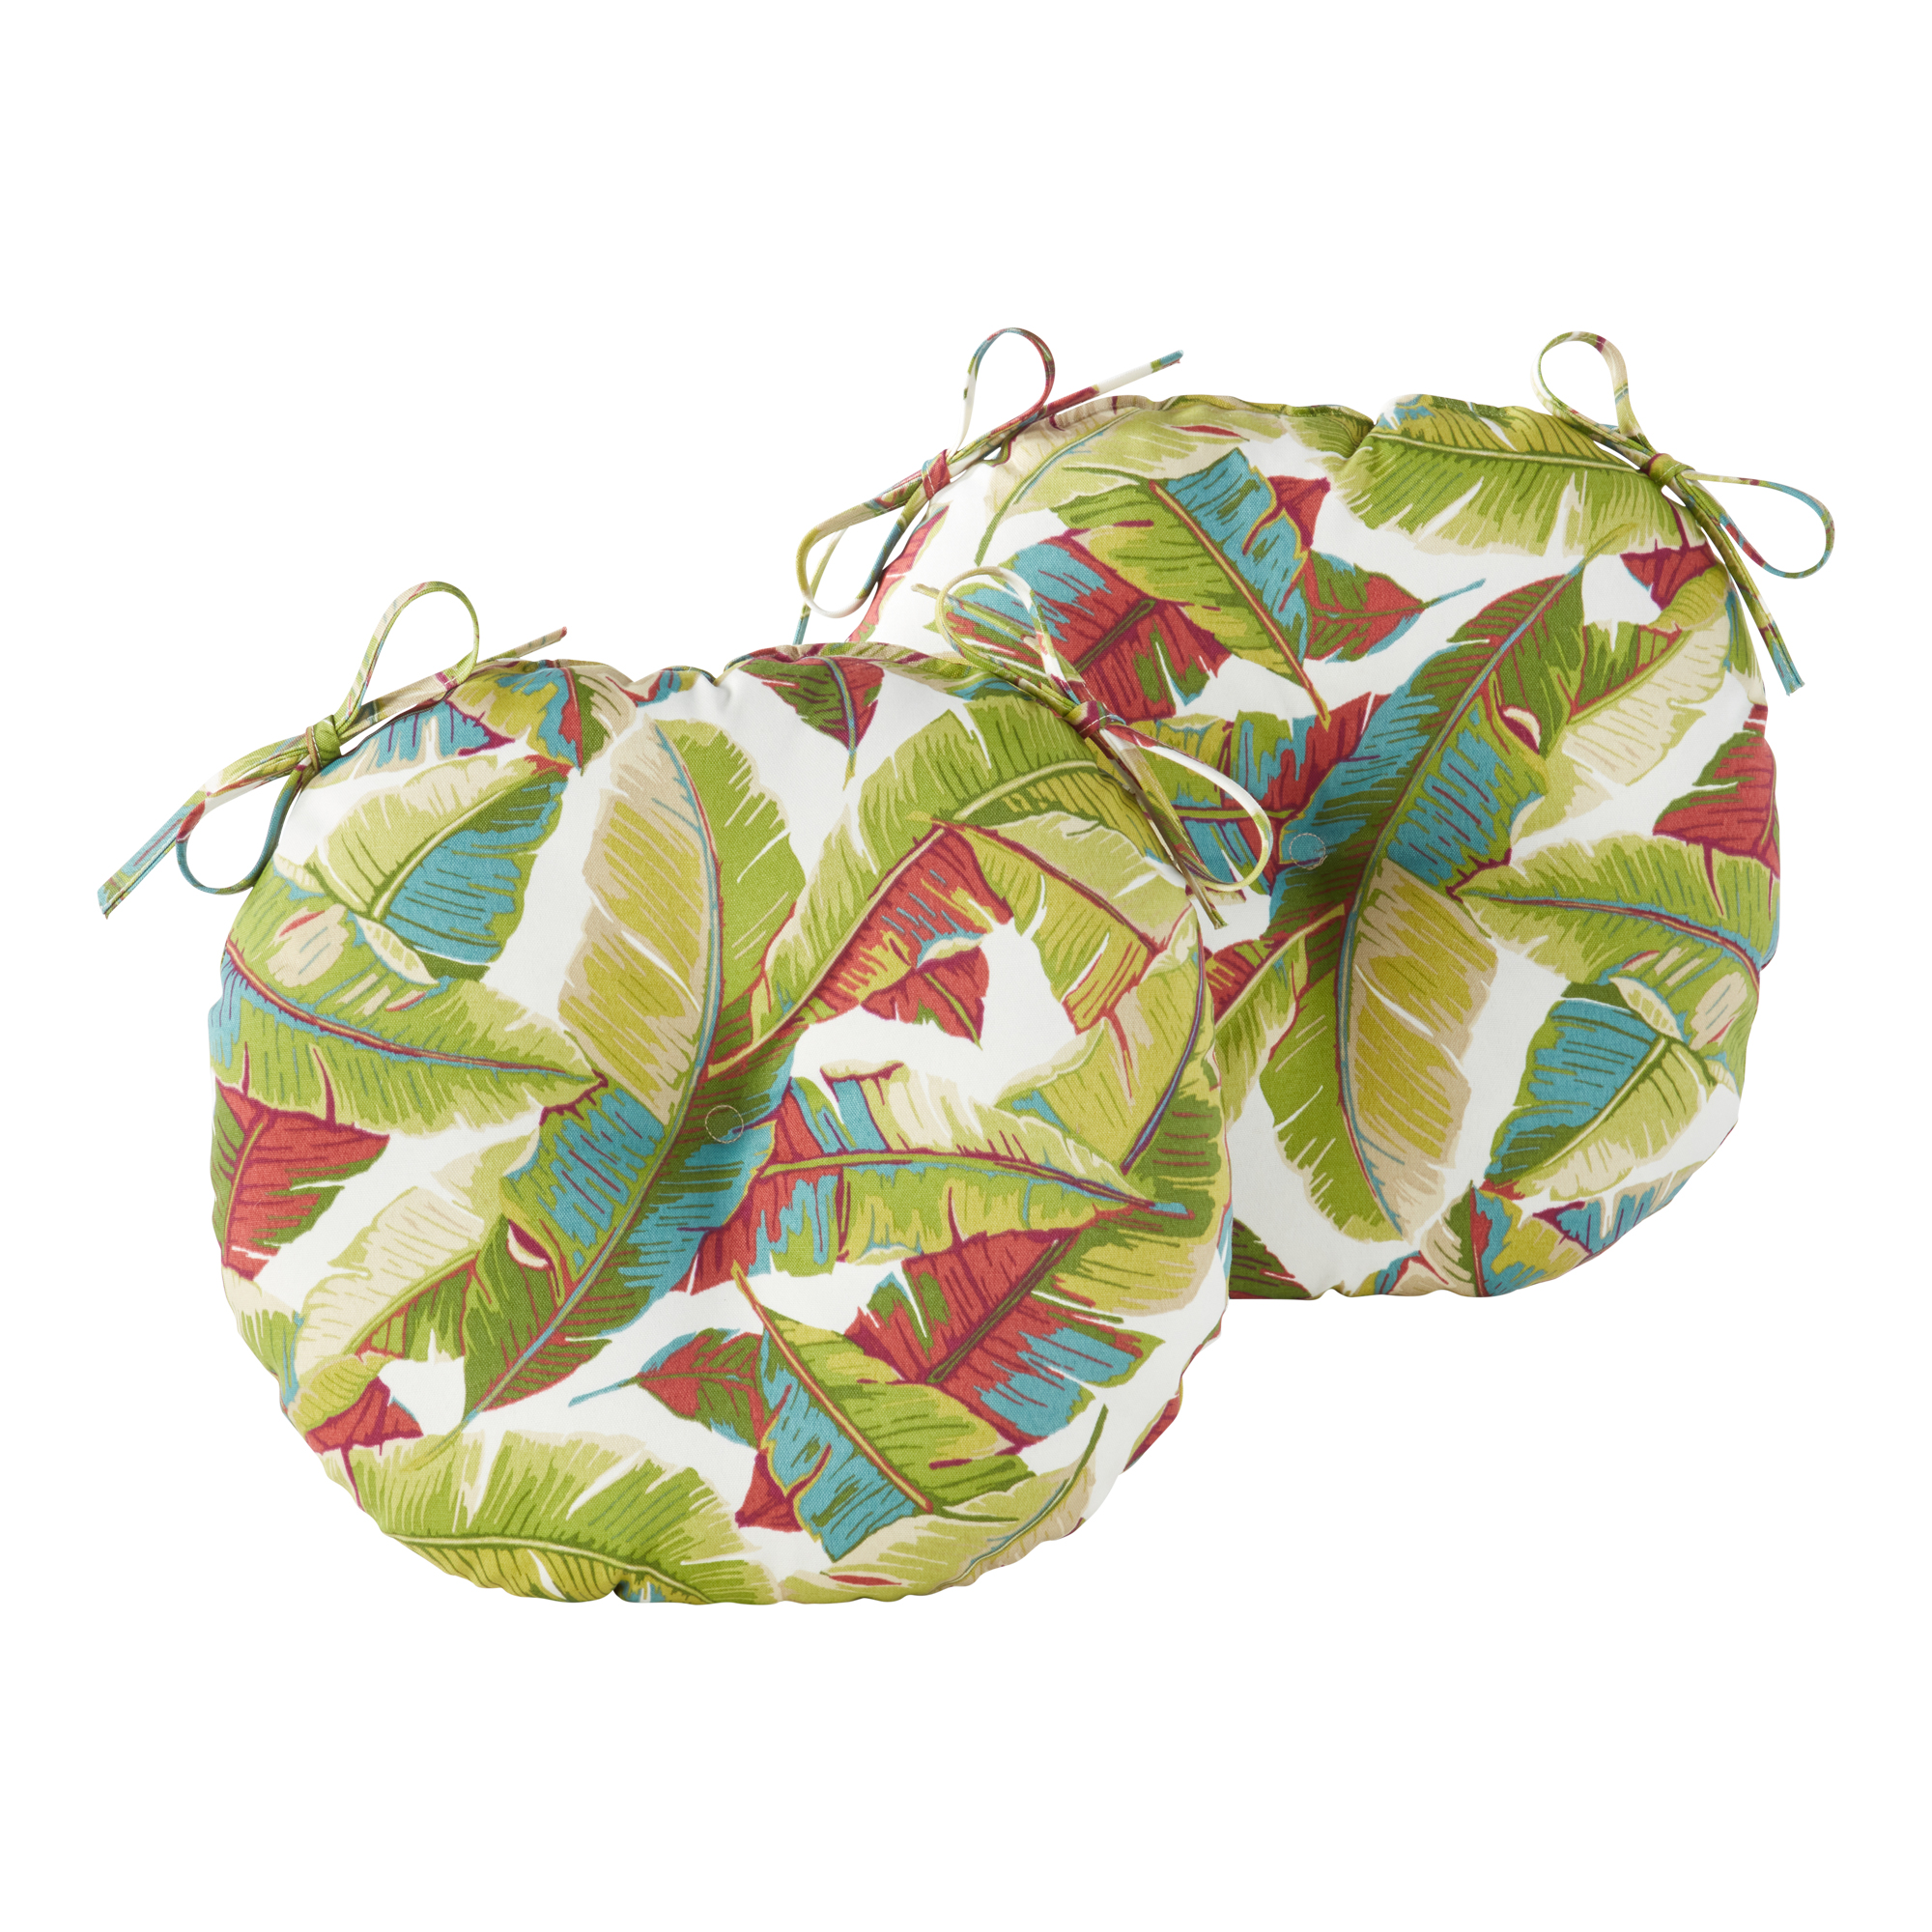 Greendale Home Fashions Palm Leaves Multicolor 15 in. Round Outdoor Reversible Bistro Seat Cushion (Set of 2) - image 1 of 5